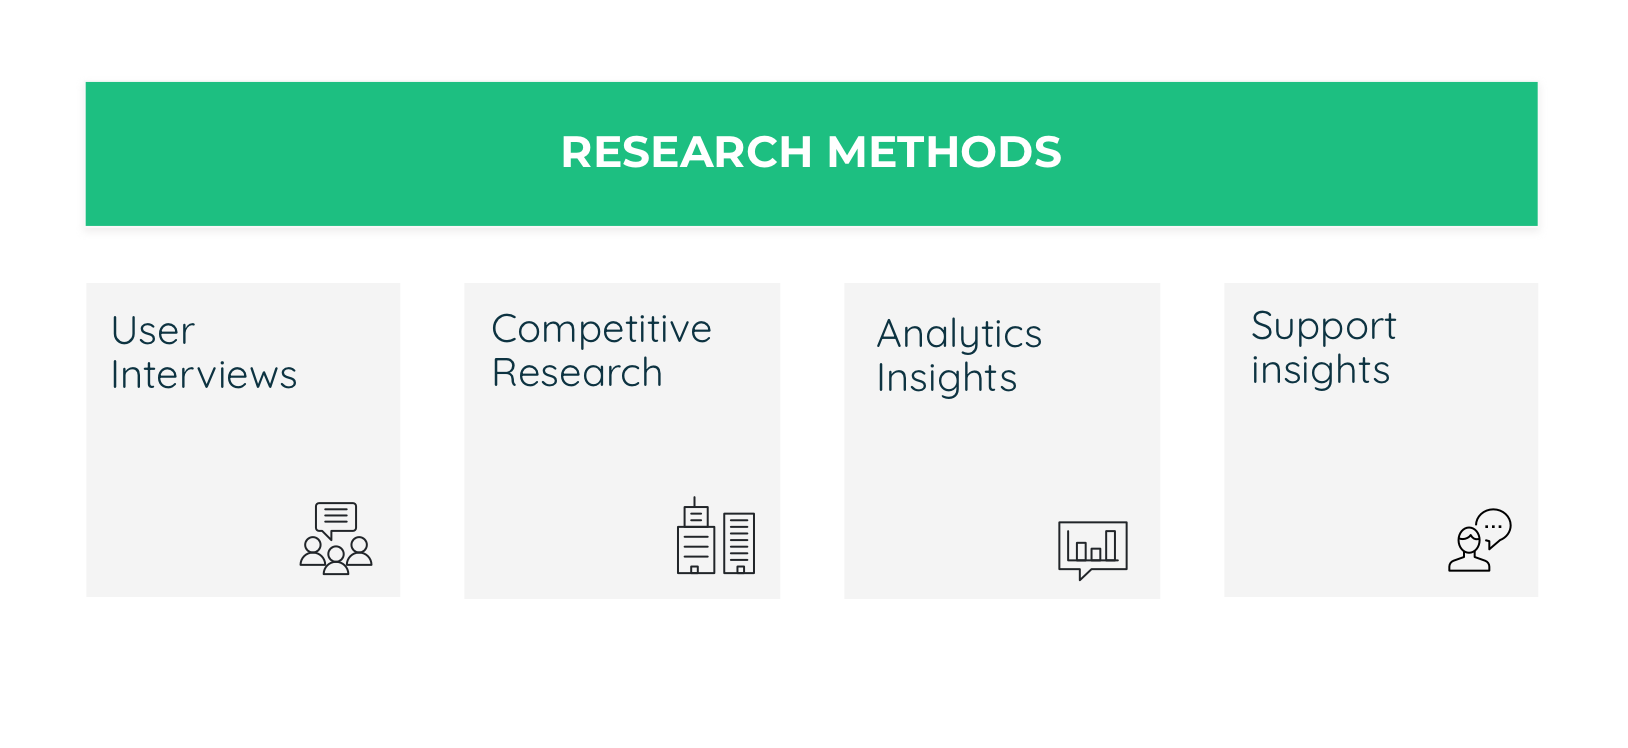 Research methods